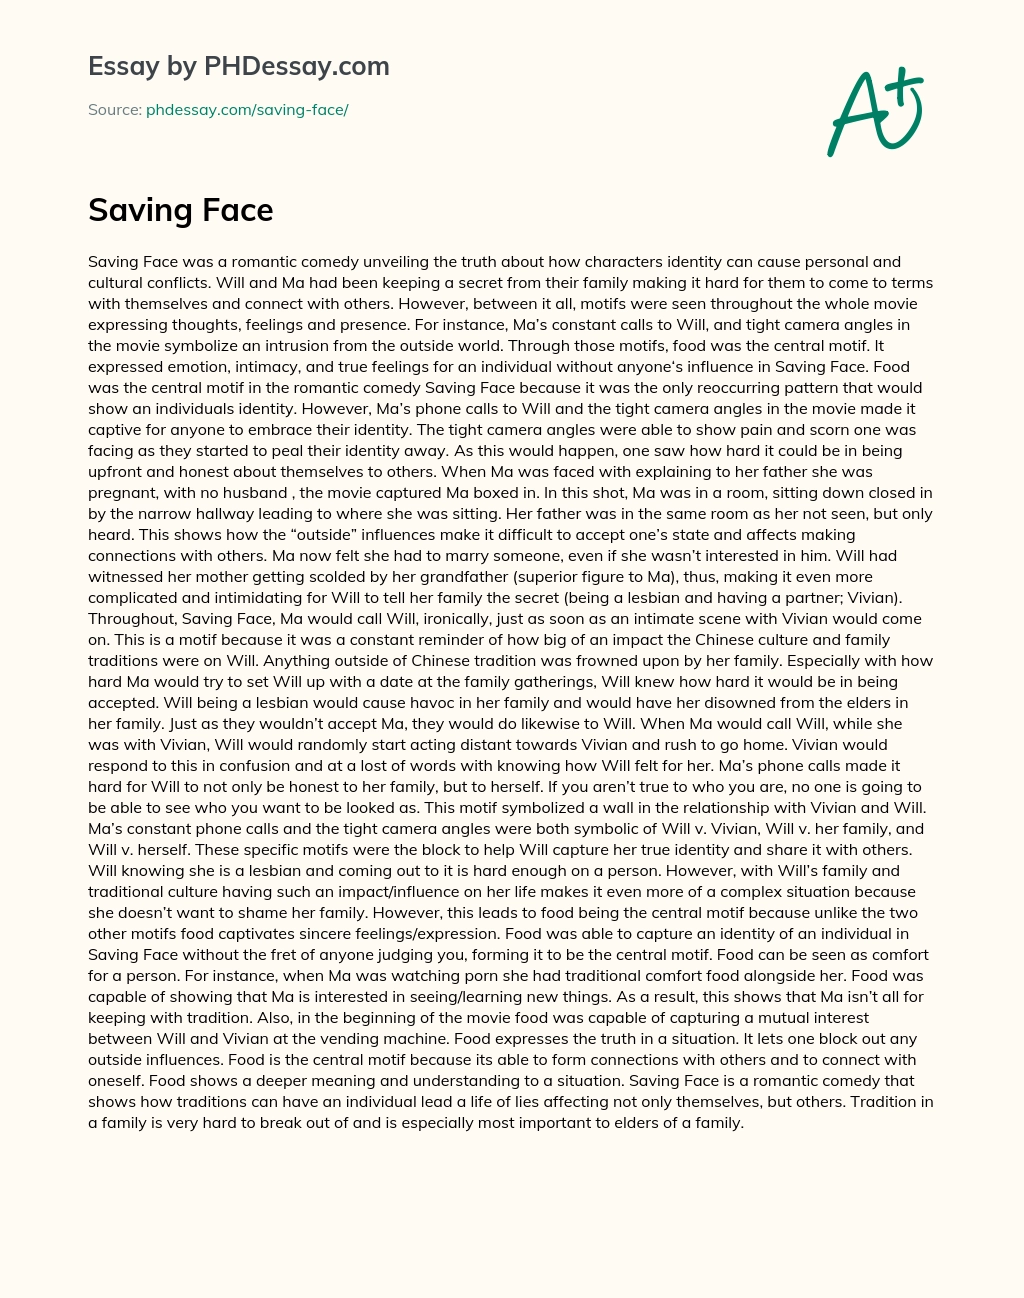 Food as the Central Motif in Saving Face: Unveiling Personal and Cultural Conflicts essay